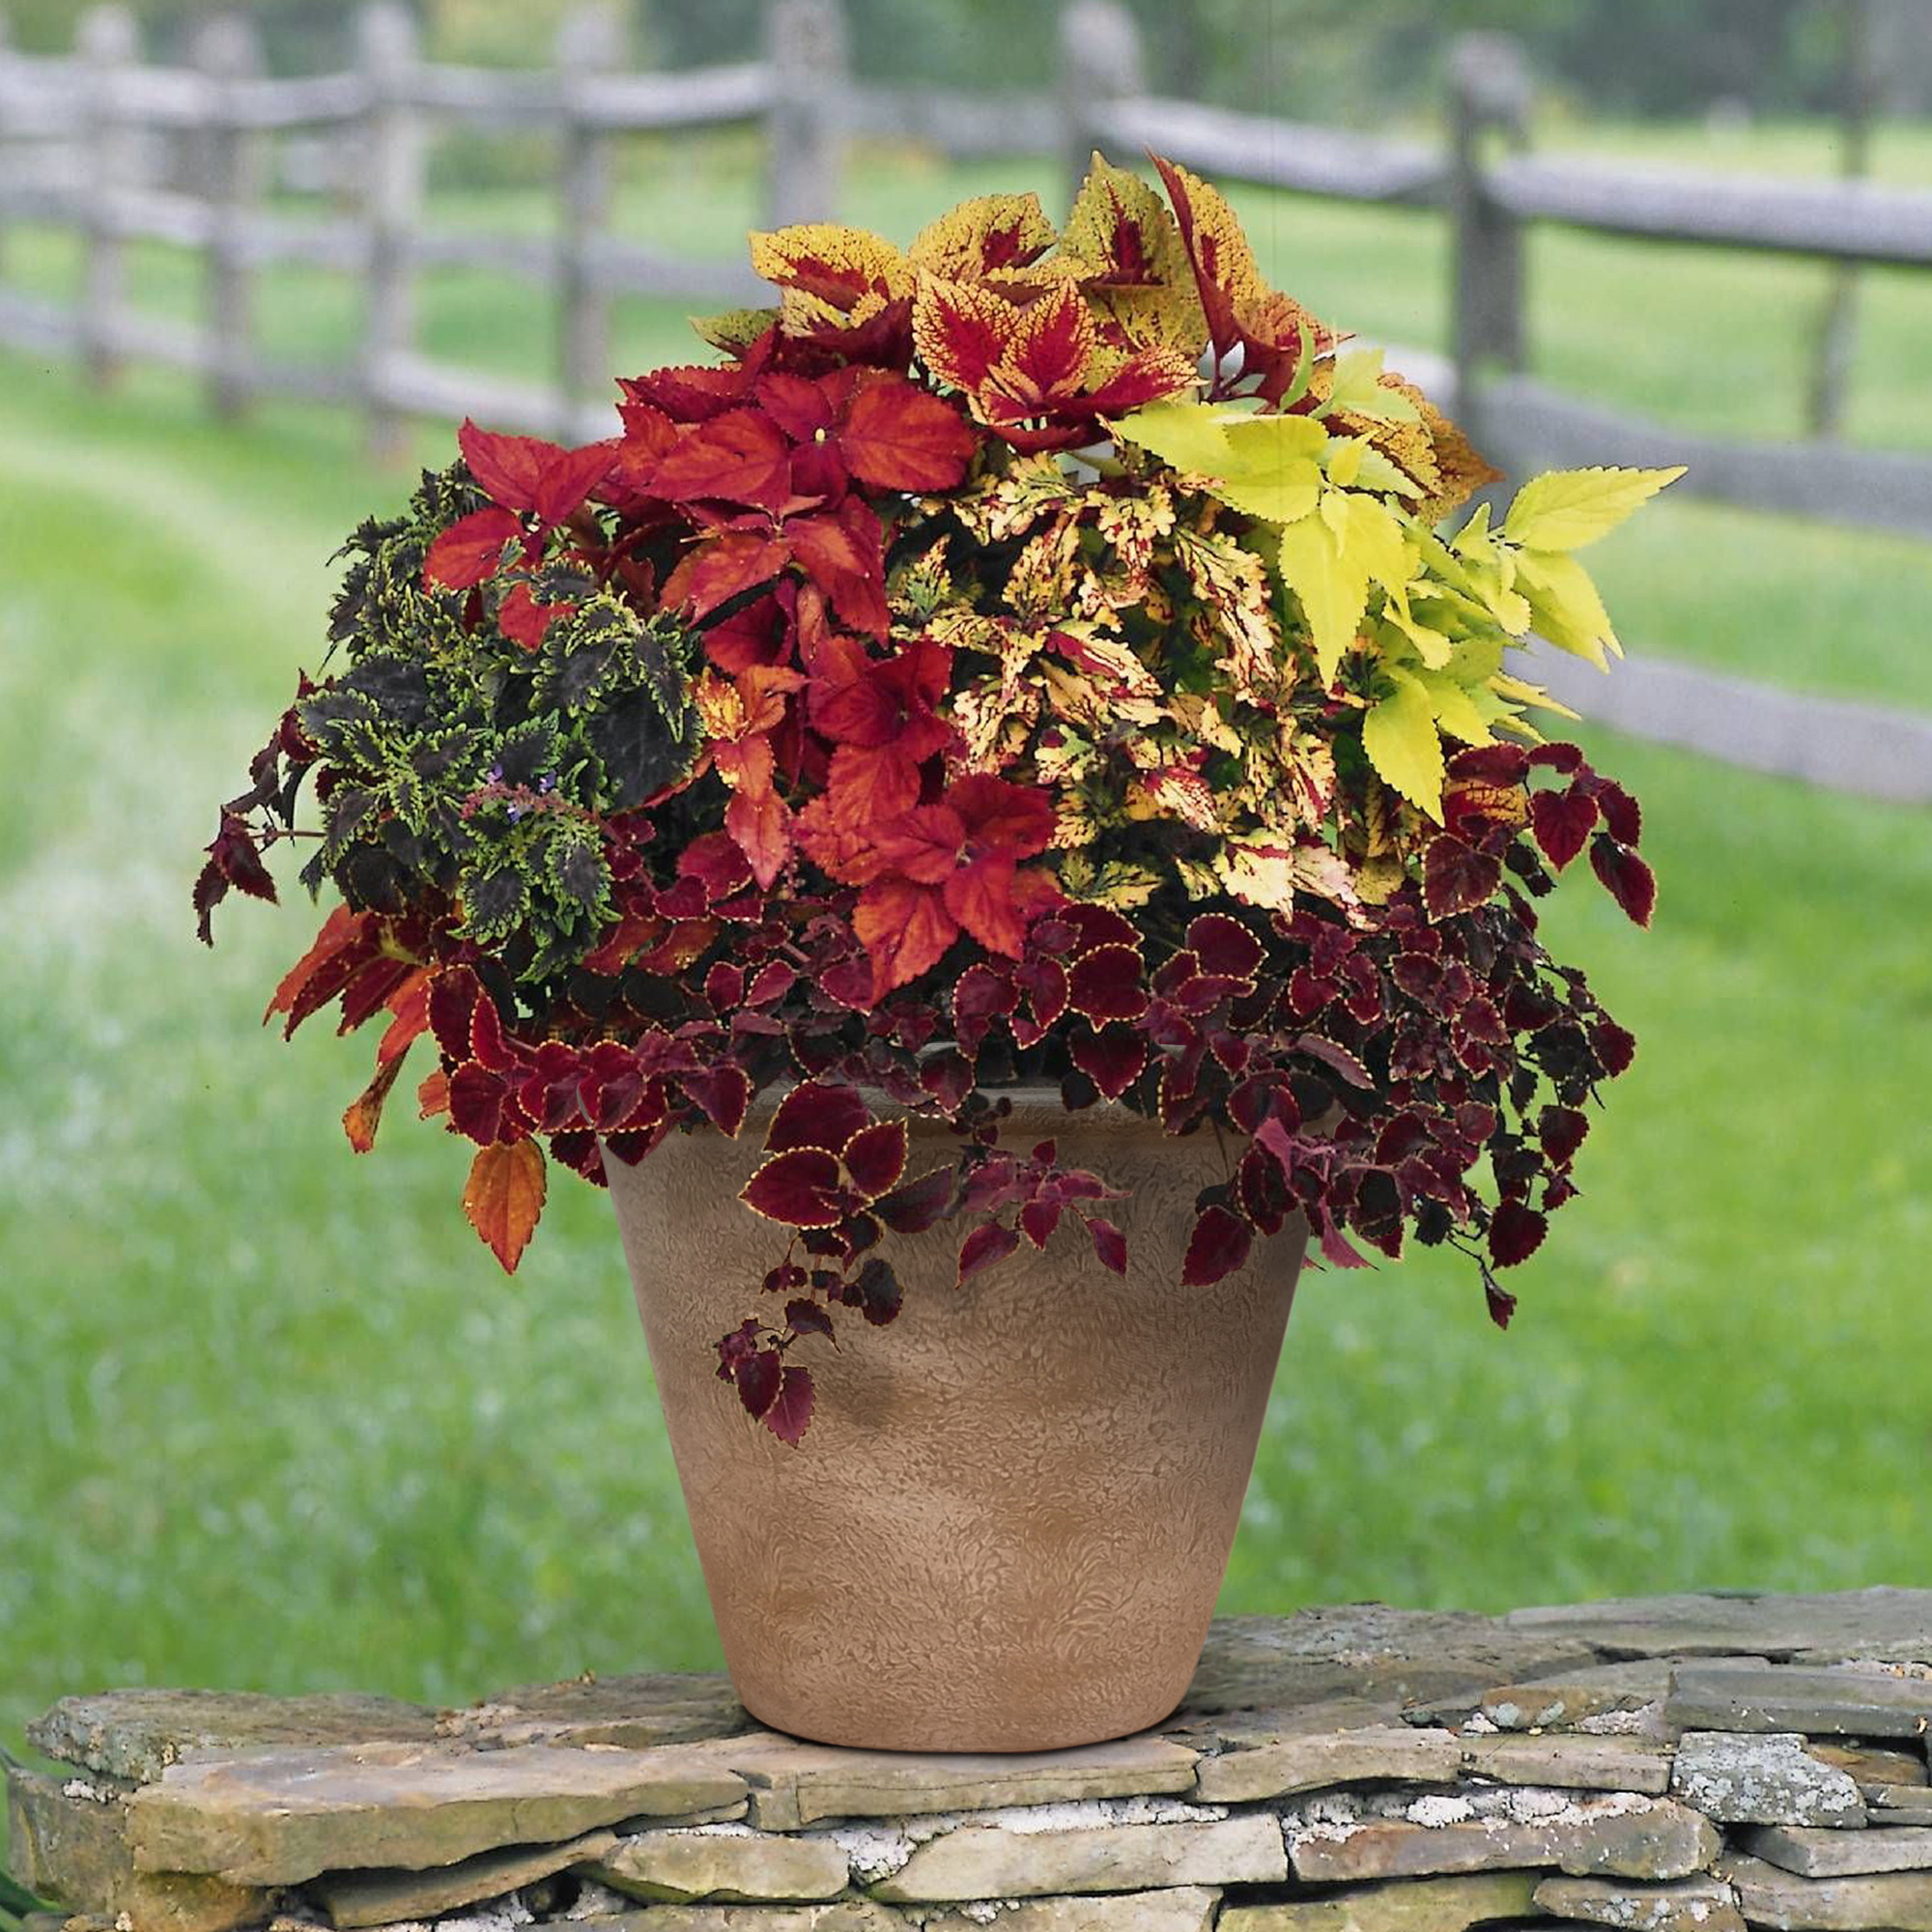 Better Homes&gardens 10 inch Hand-painted Brown Ceramic Pot - image 2 of 9